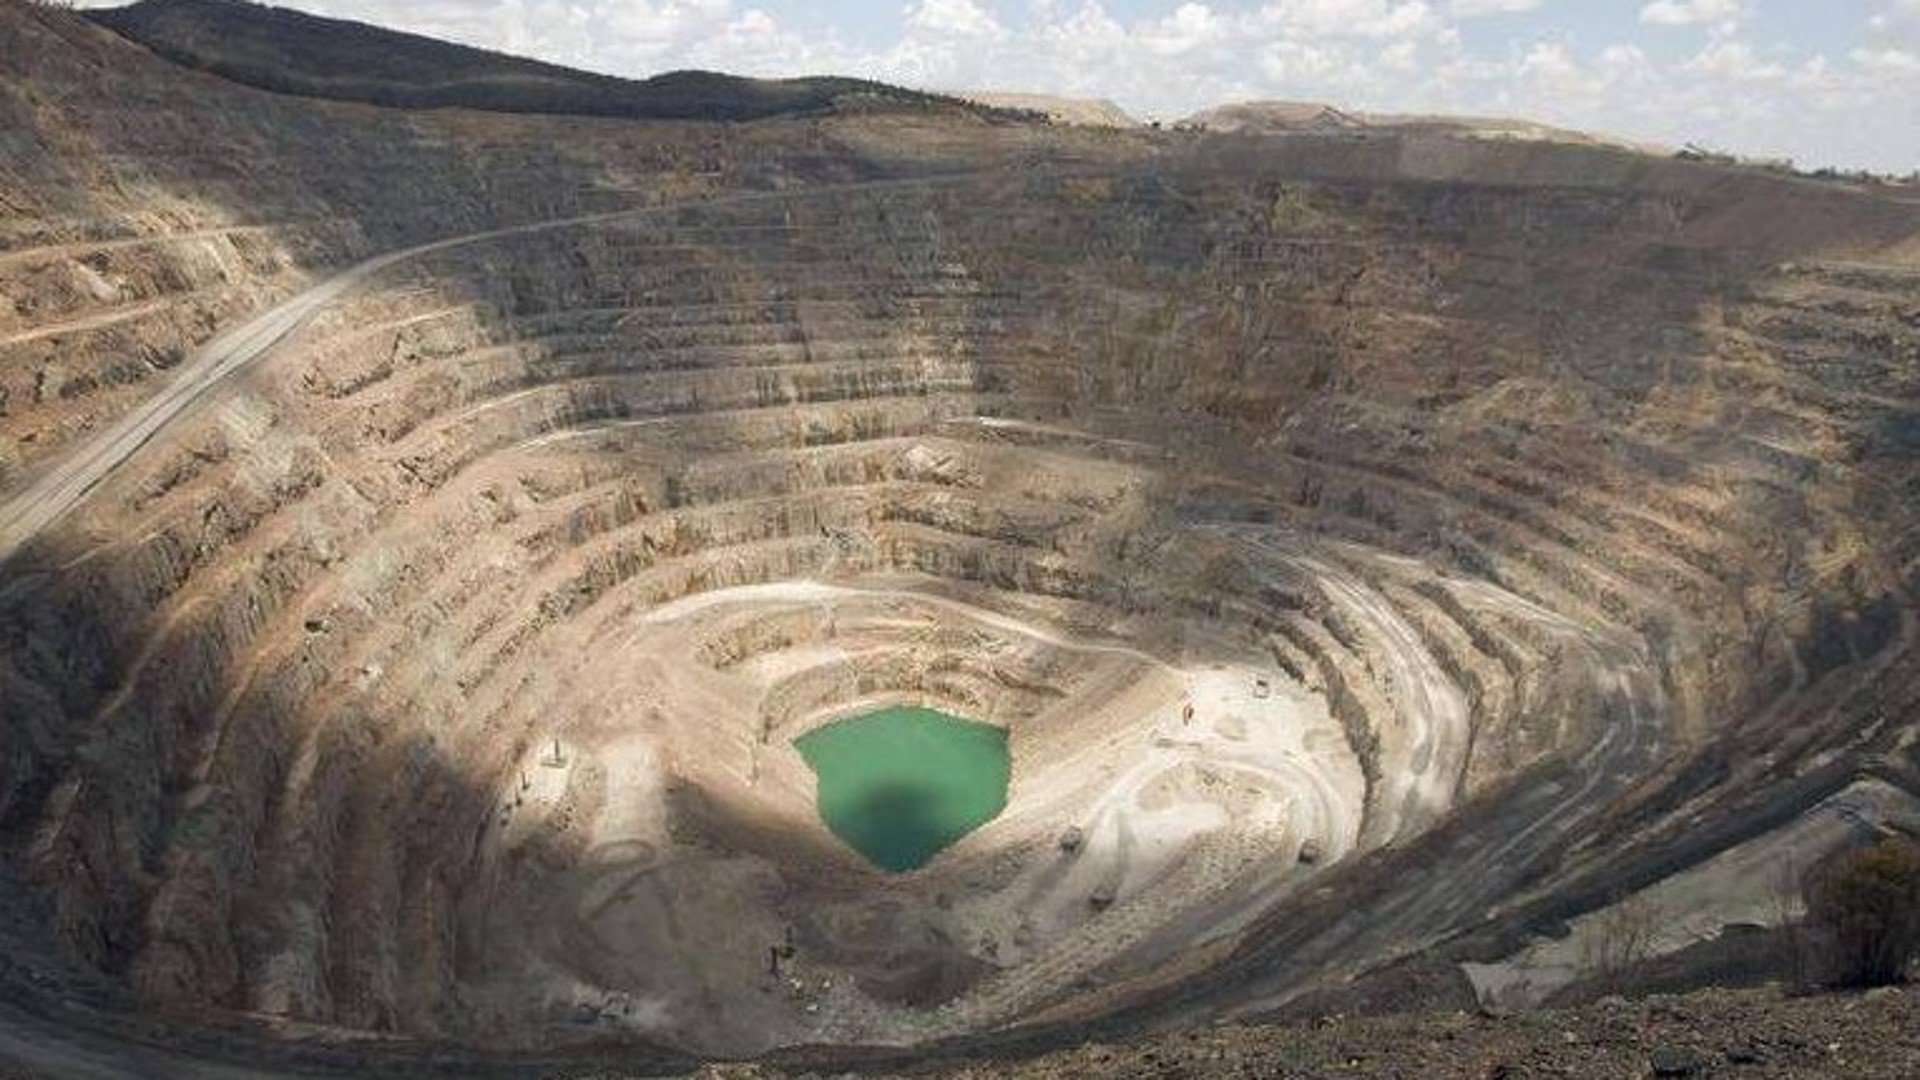 Image of the Cadia Tailings mine